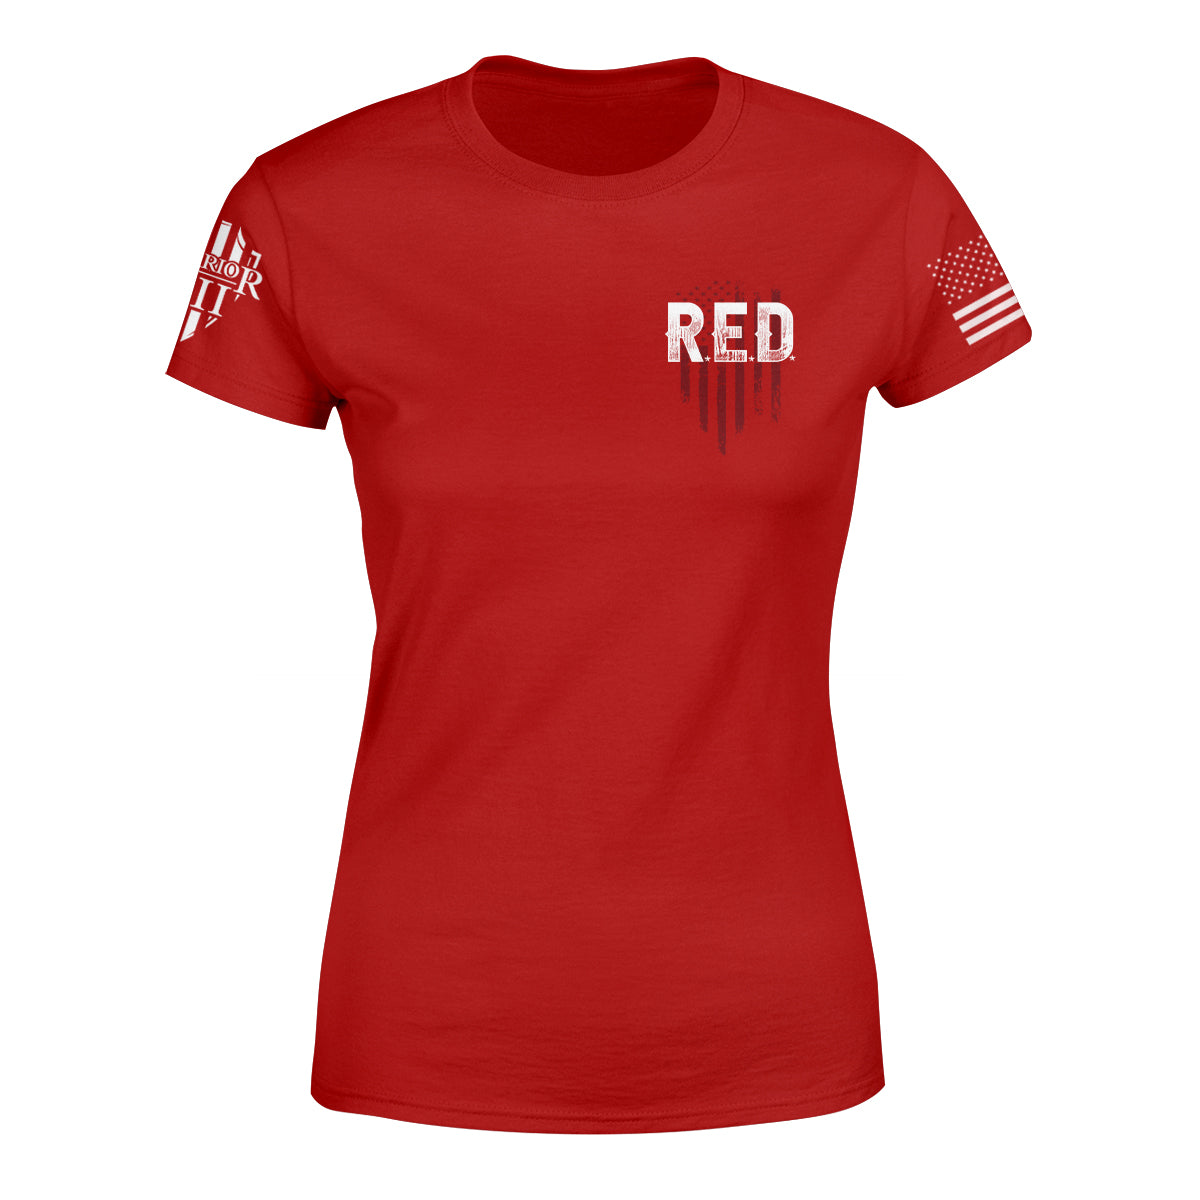 The front of "RED" featuring small chest print of RED on the upper left side